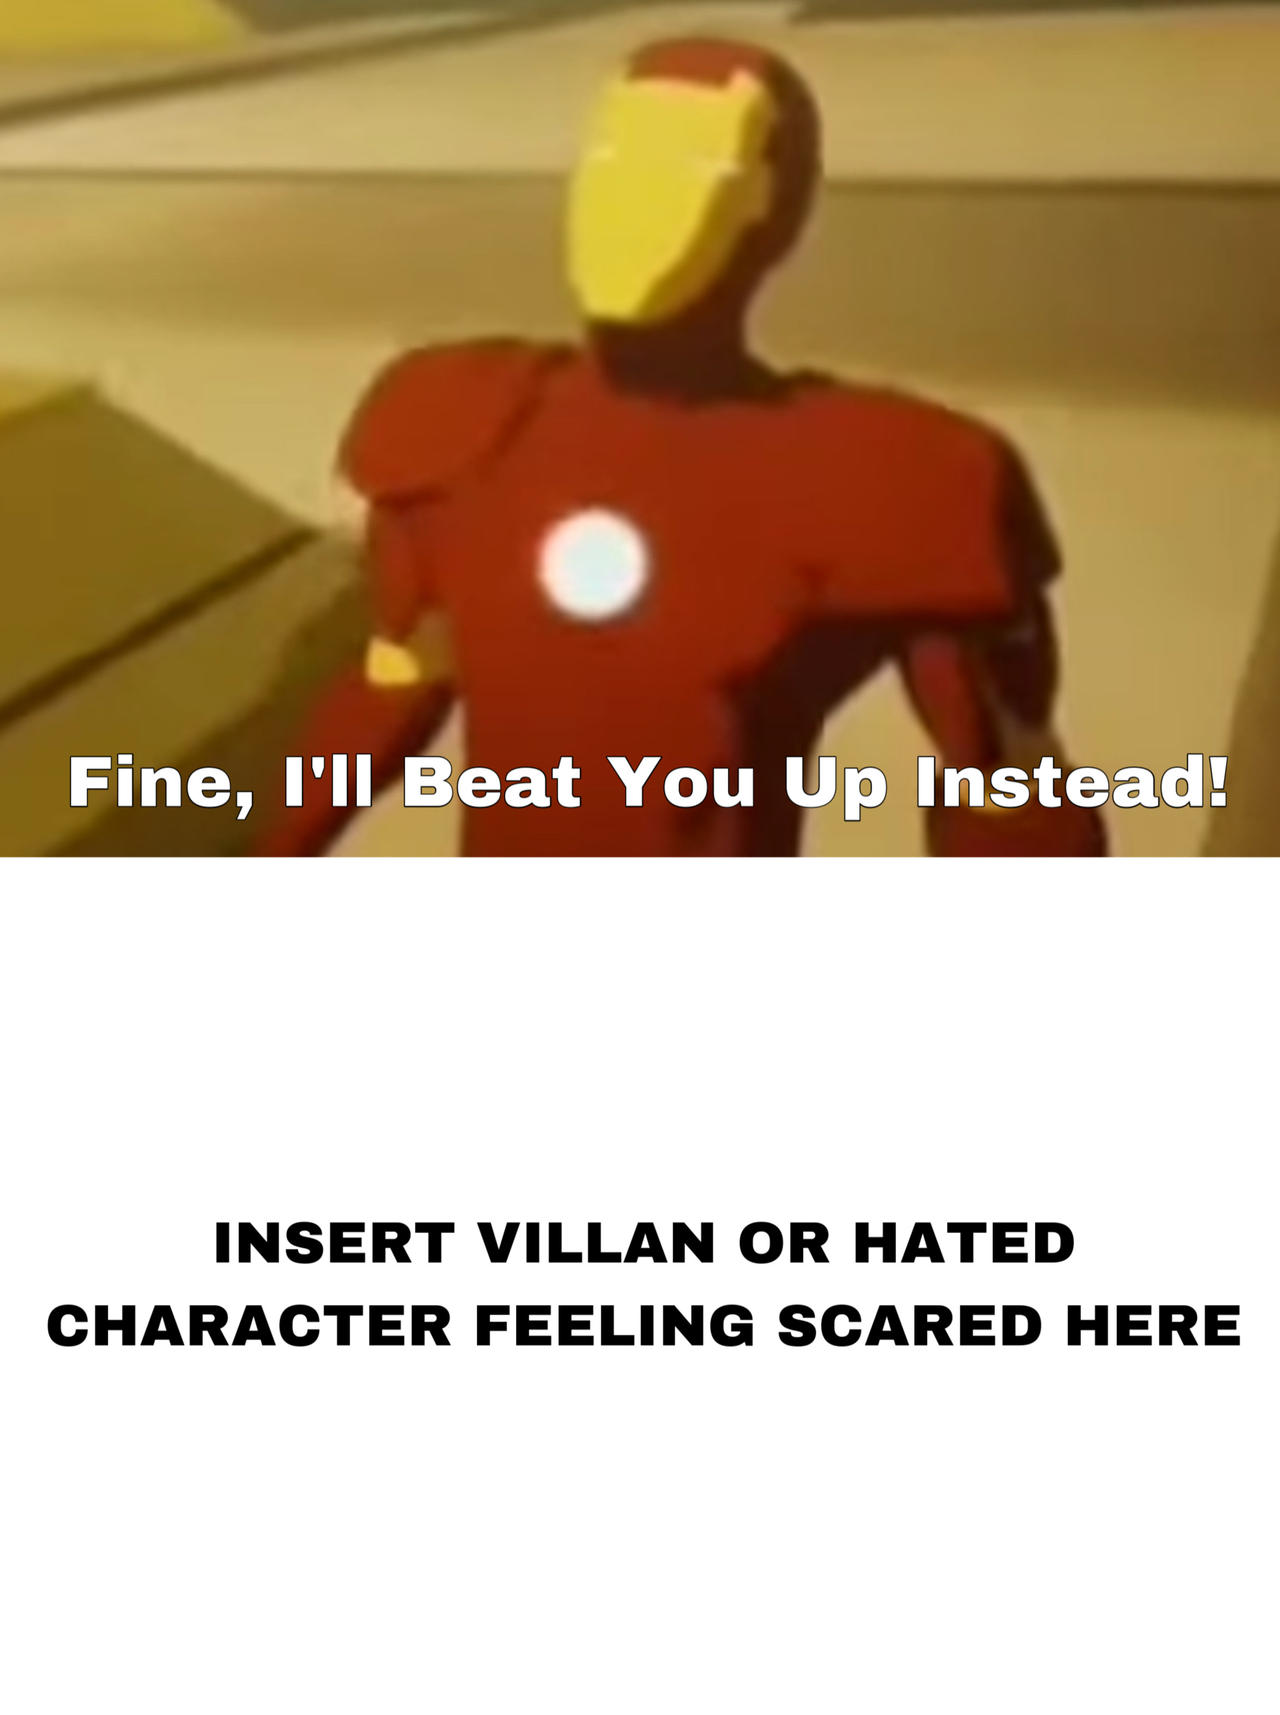 Iron Man Does This